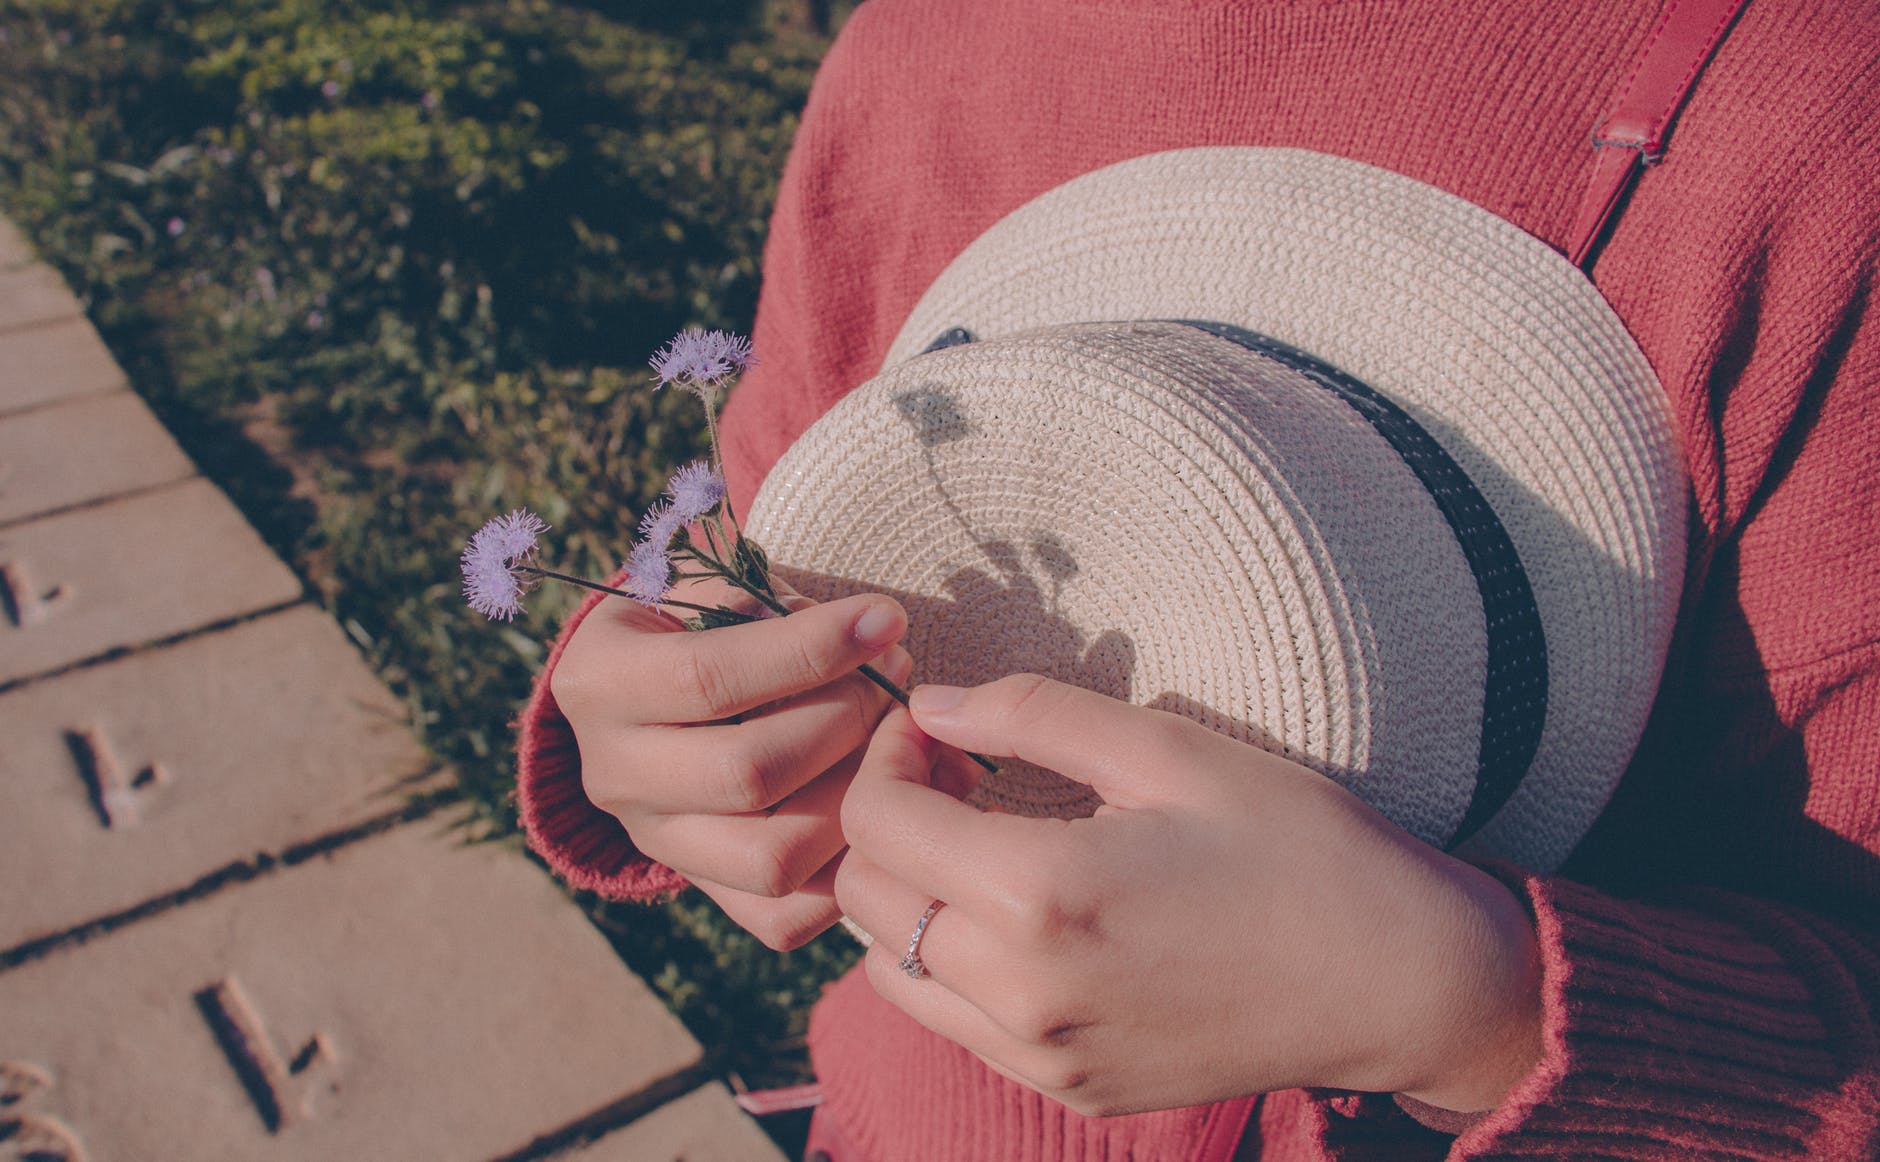 Person wearing sweater holding flower and hat photo